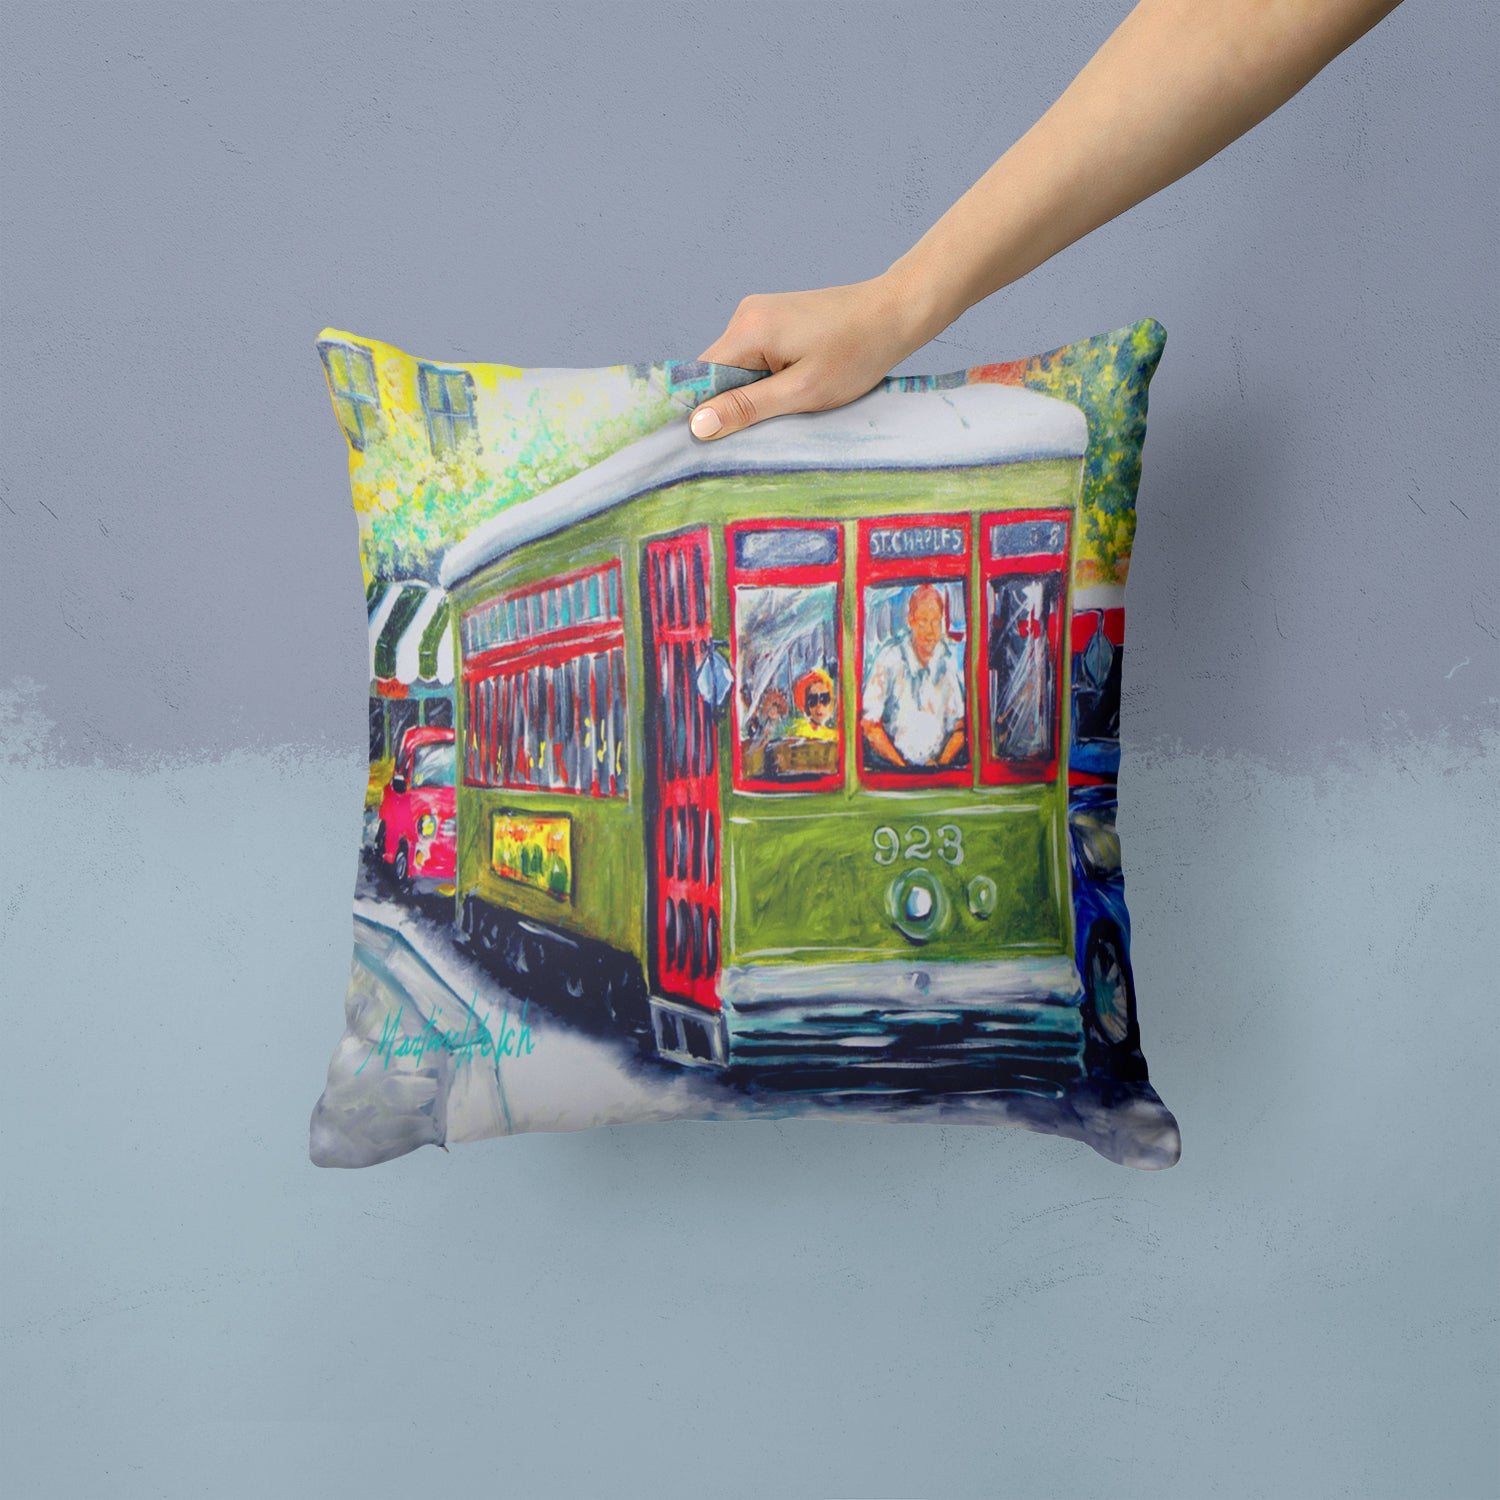 Streetcar Mid Summer Fabric Decorative Pillow MW1338PW1414 - the-store.com